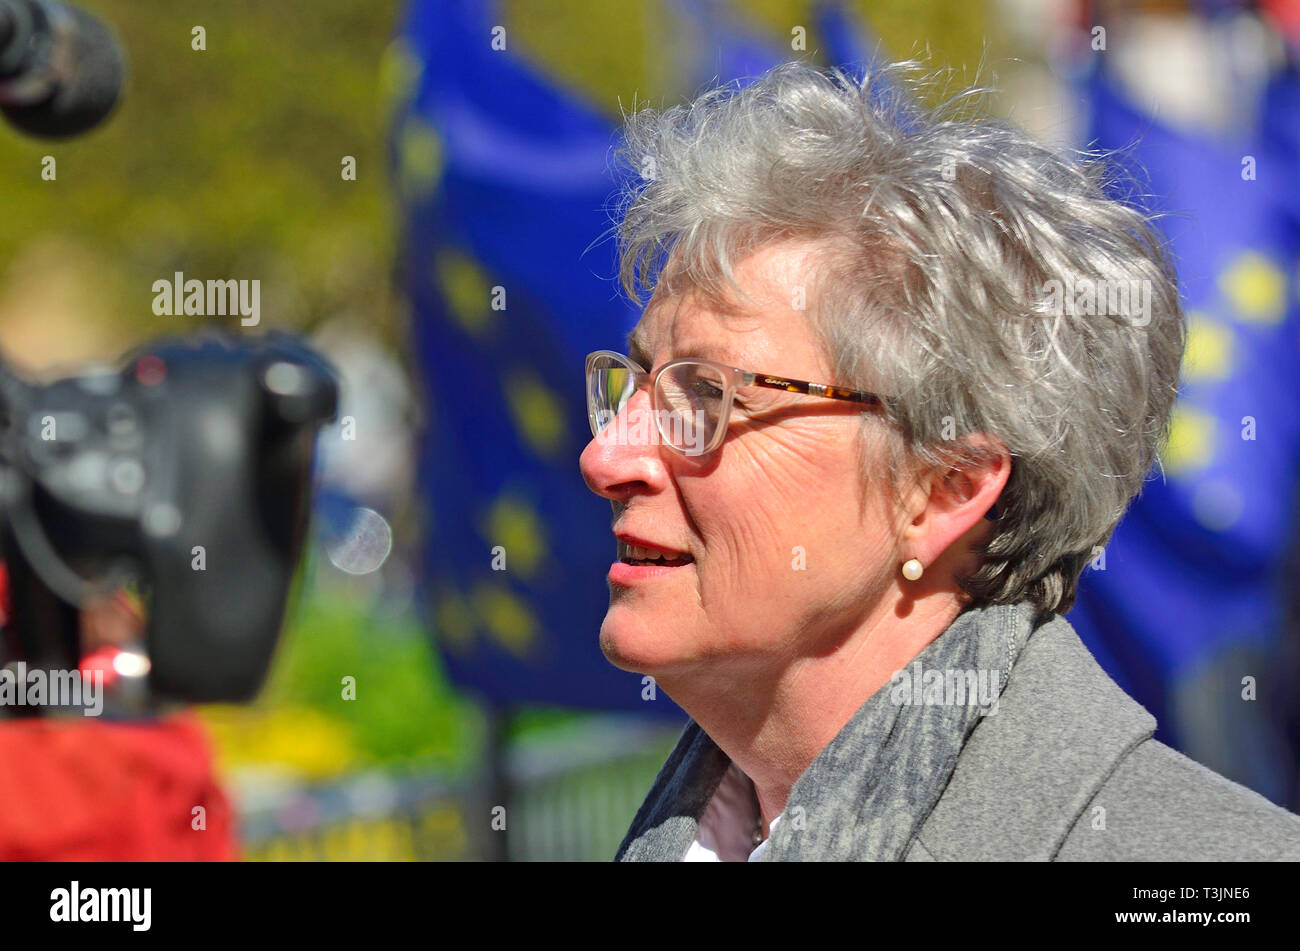 Westminster, London, UK. 10th April 2019. Chair of the Vote Leave campaign, Gisela Stuart - former Labour MP - interviewed by German television on College Green, Westminster Credit: PjrNews/Alamy Live News Stock Photo